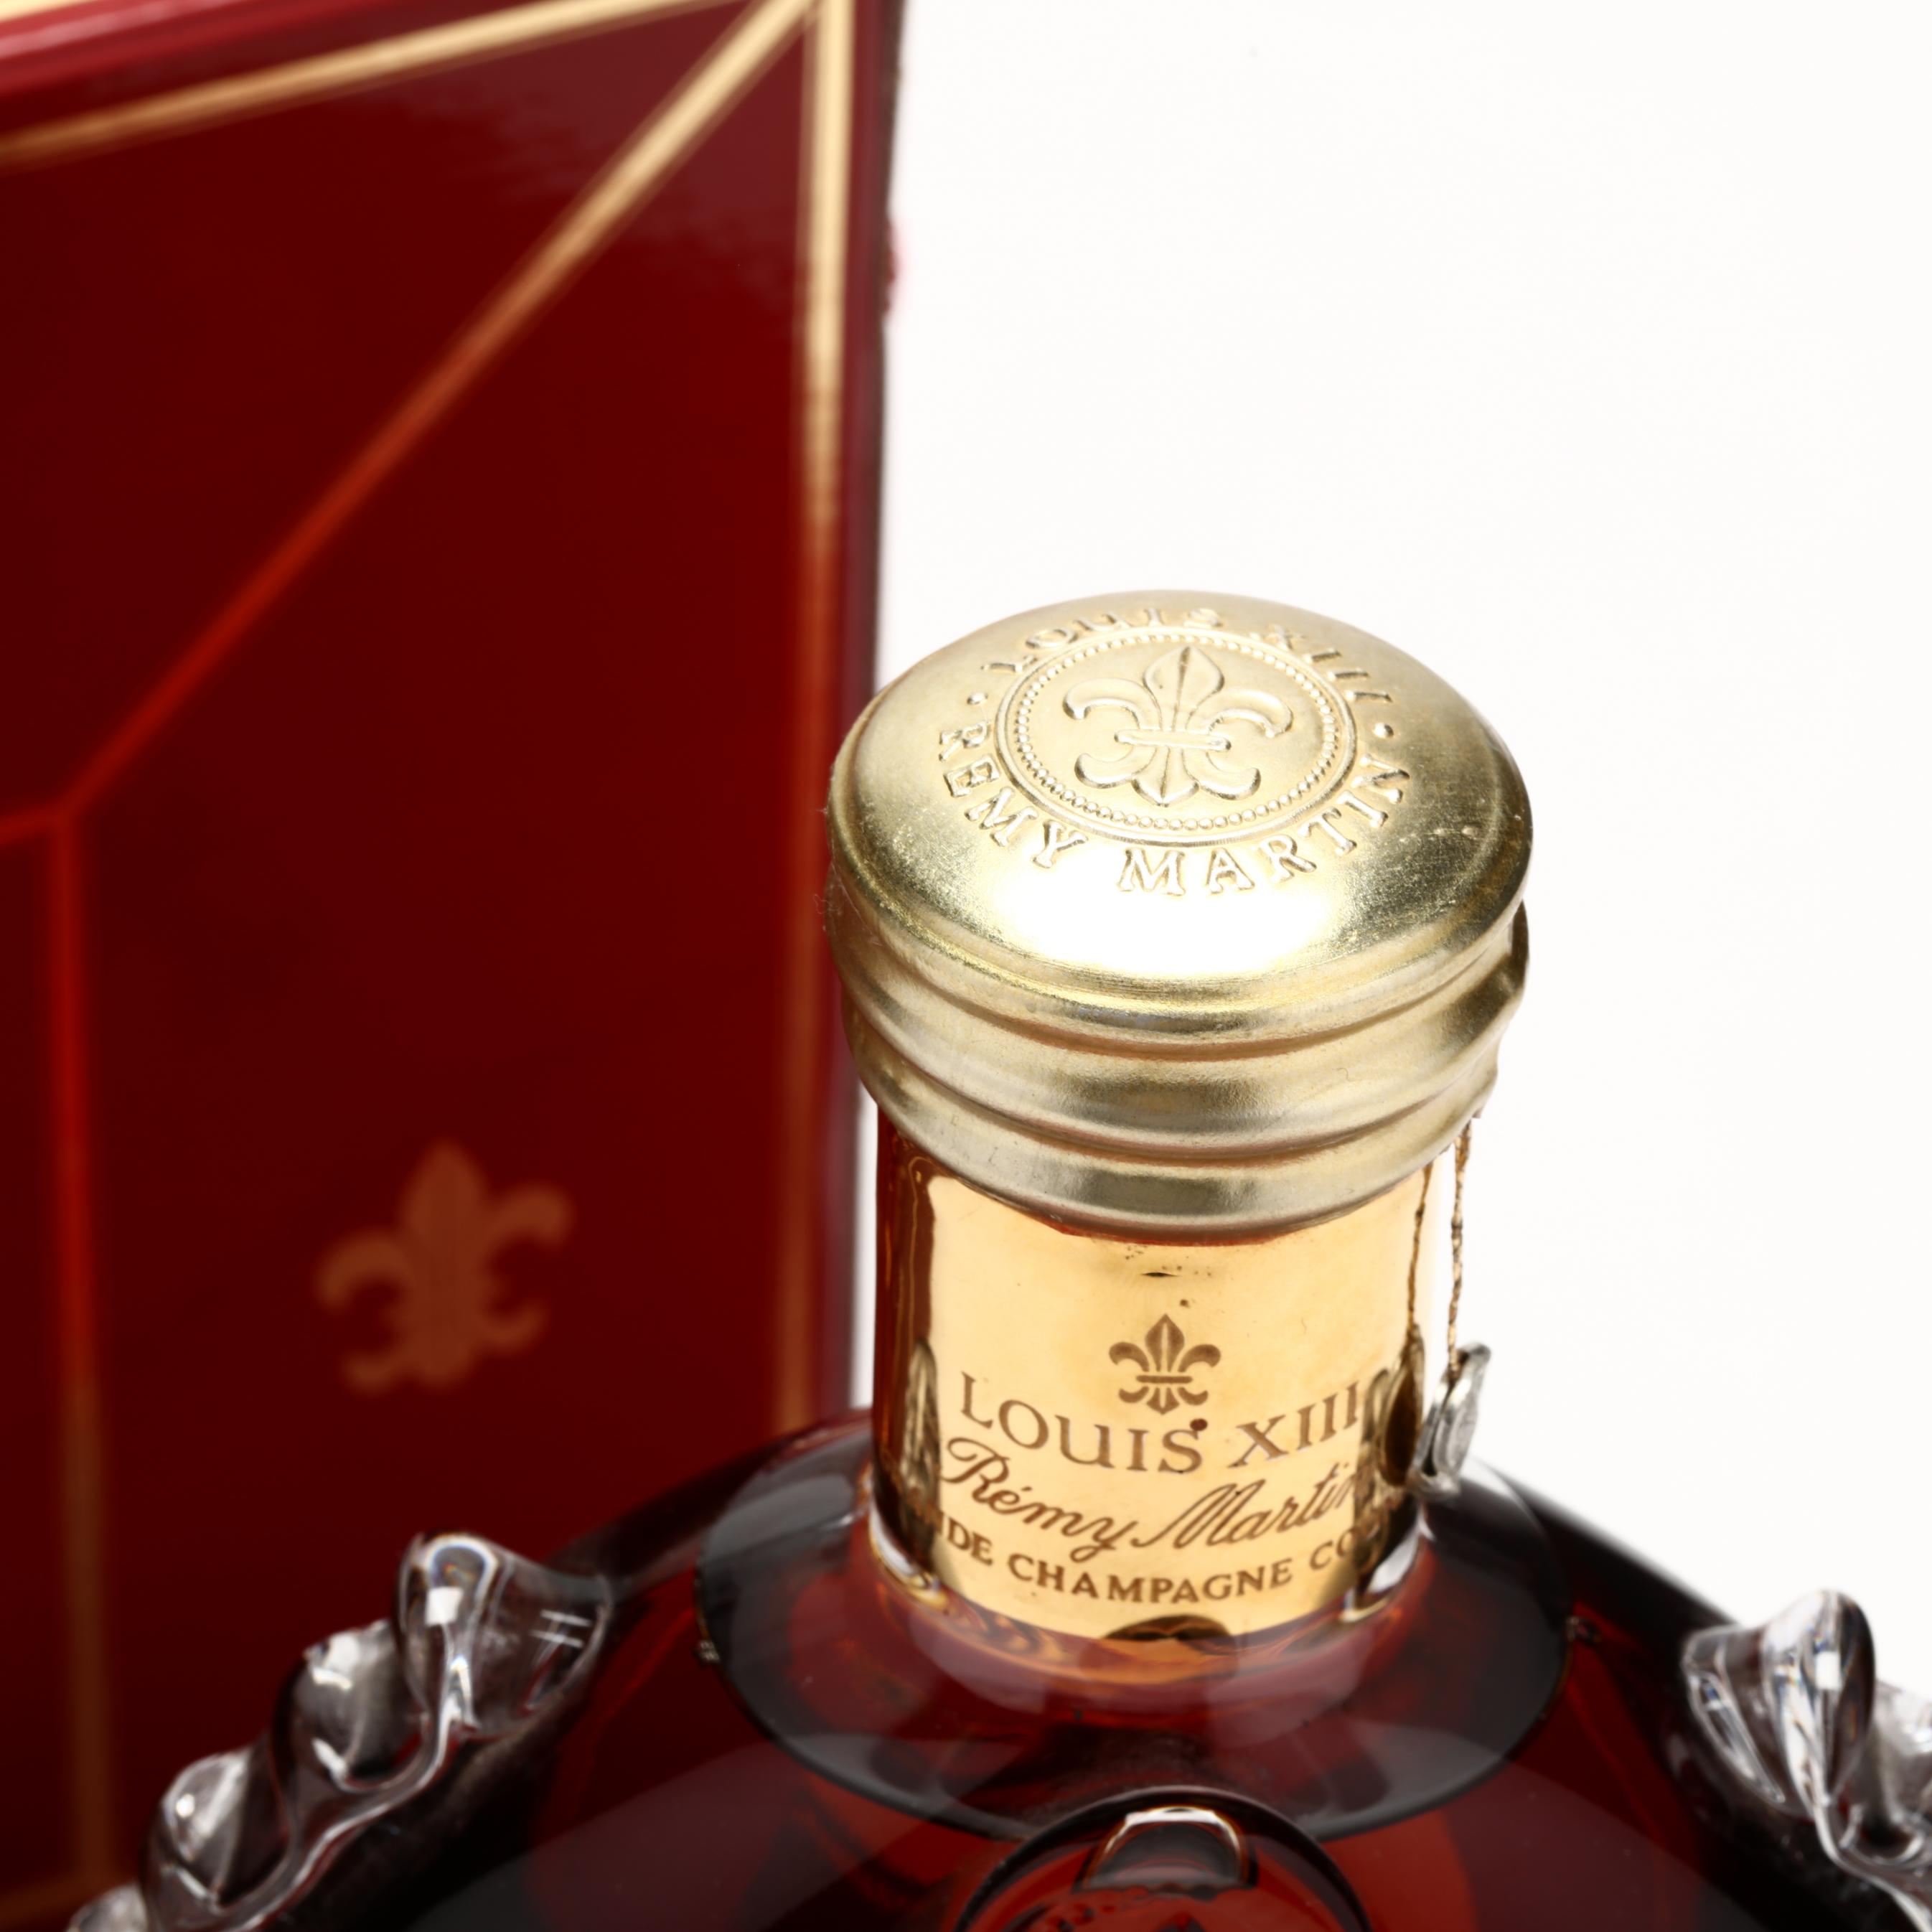 Remy Martin Brandy Louis XIII Cognac/Baccarat Crystal, 700 milliliters :  : Grocery